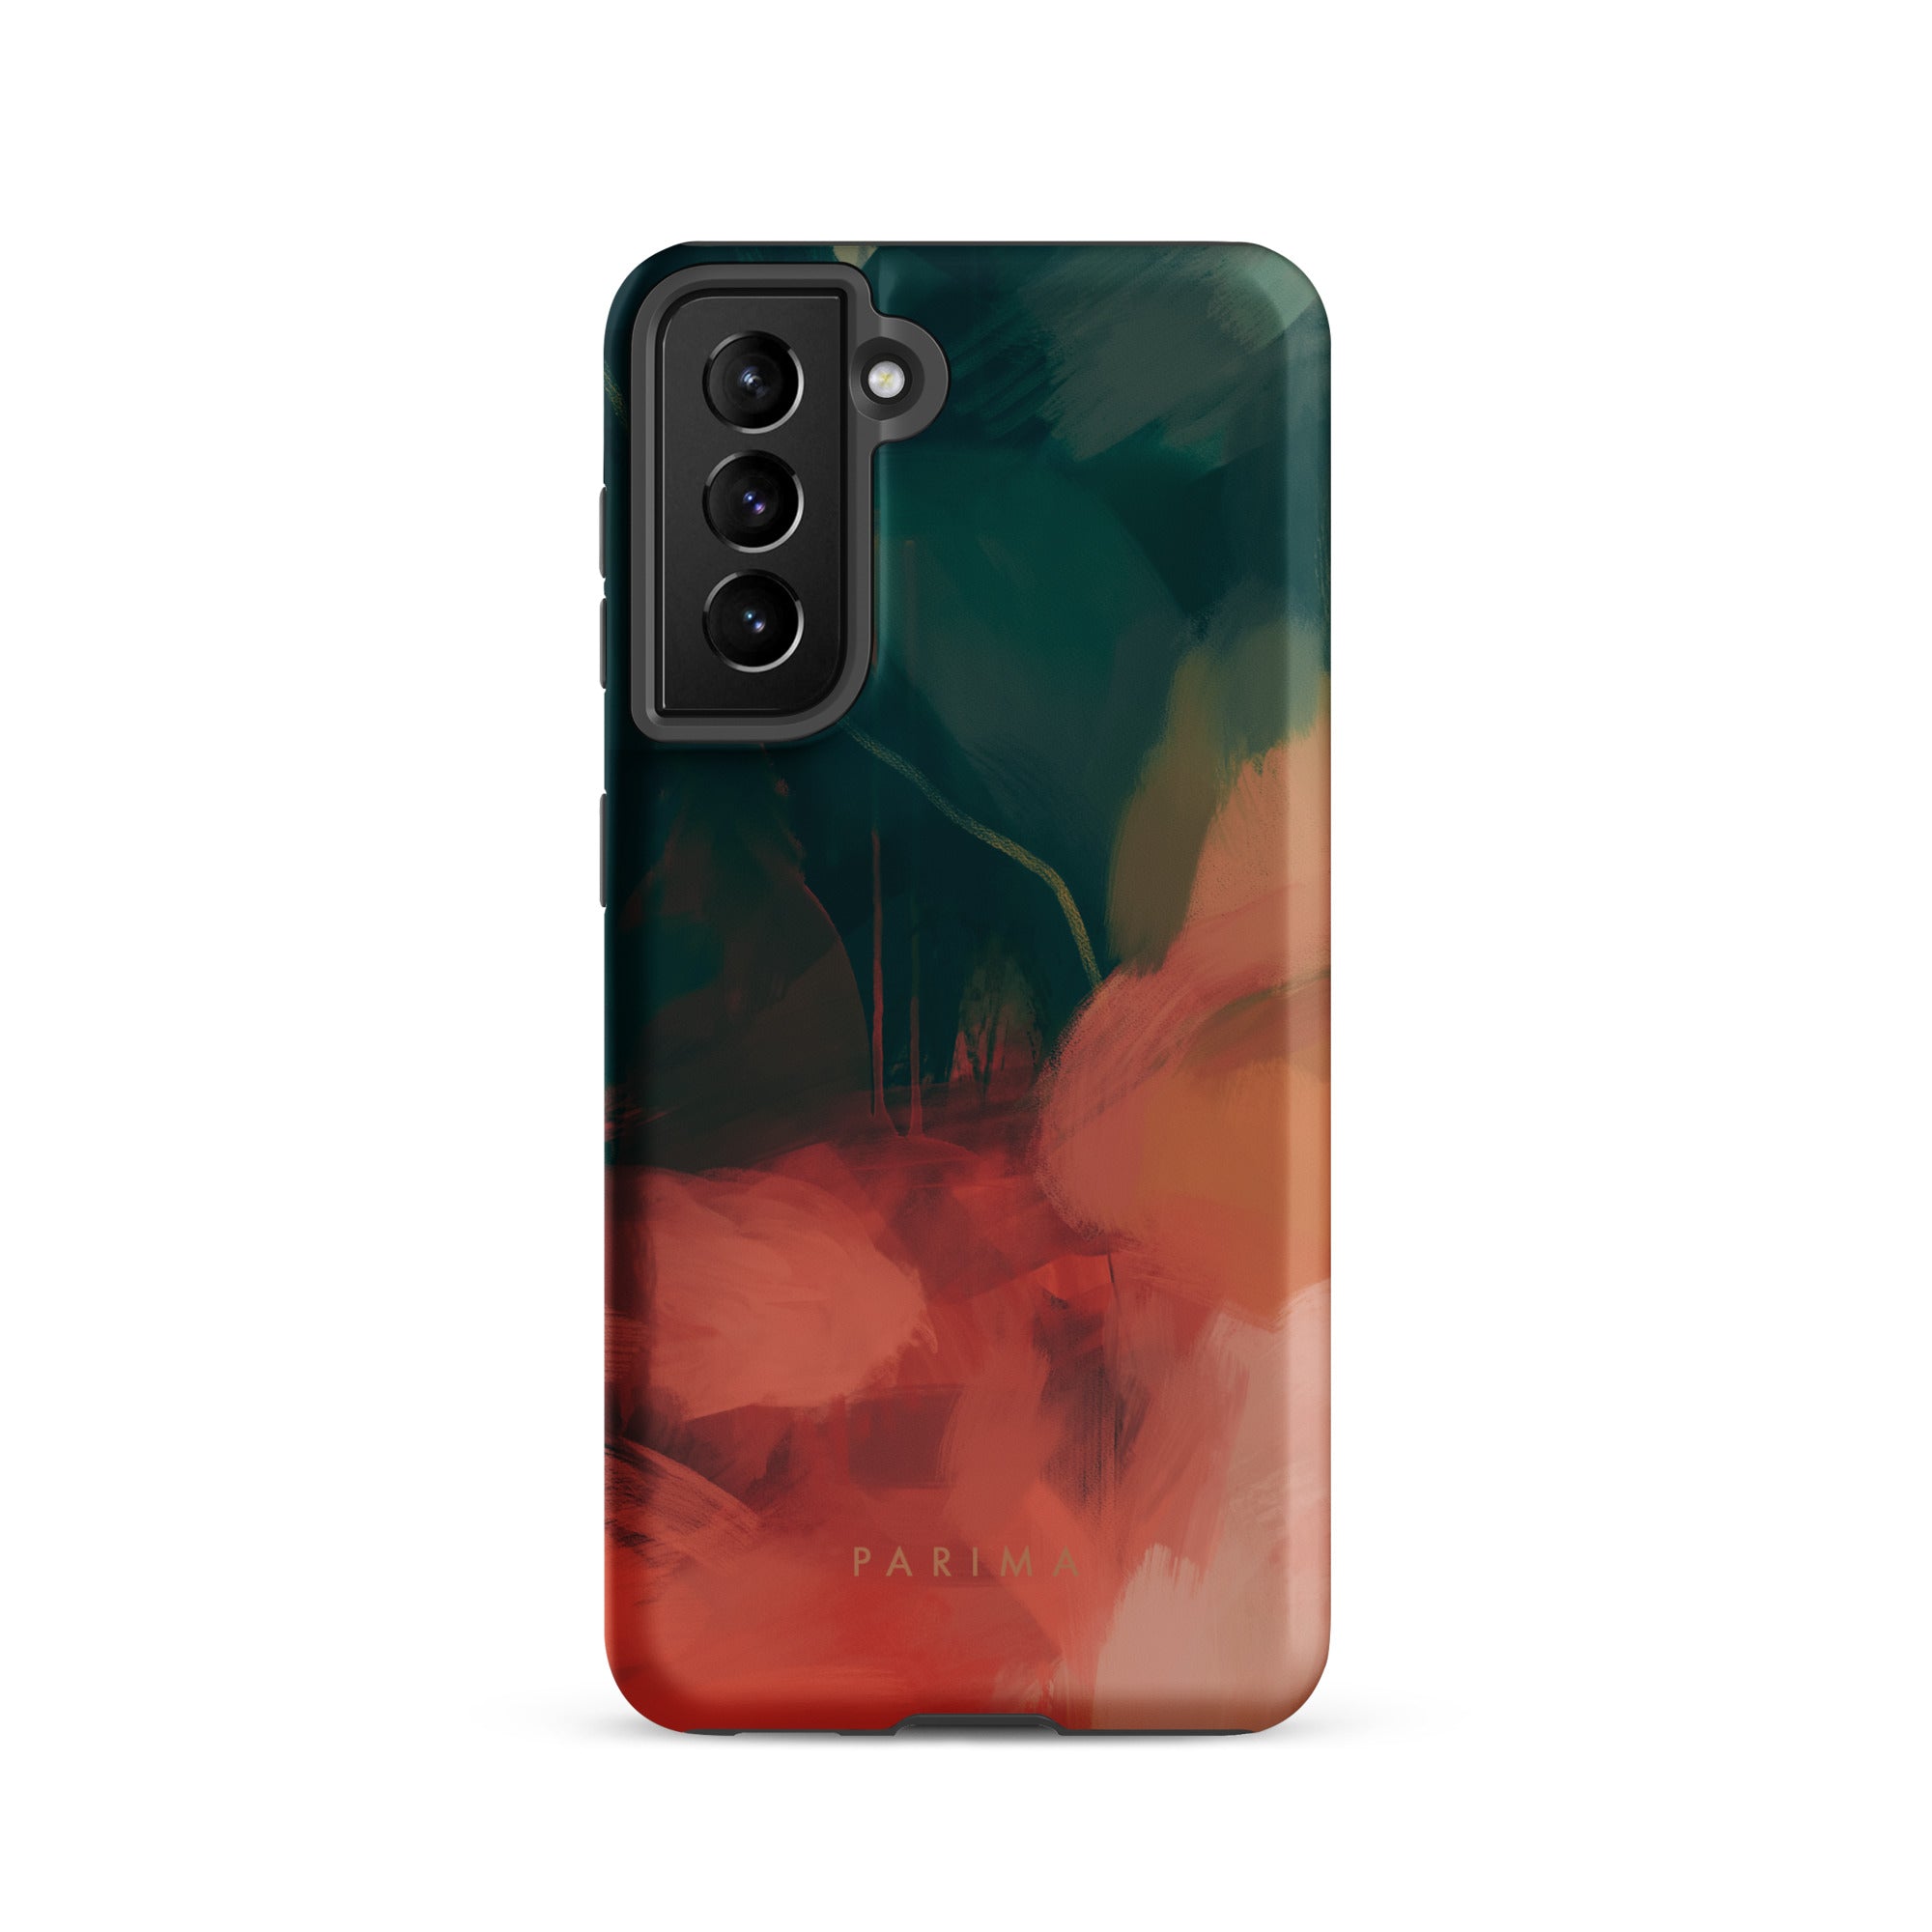 Eventide, green and red abstract art on Samsung Galaxy S21 tough case by Parima Studio